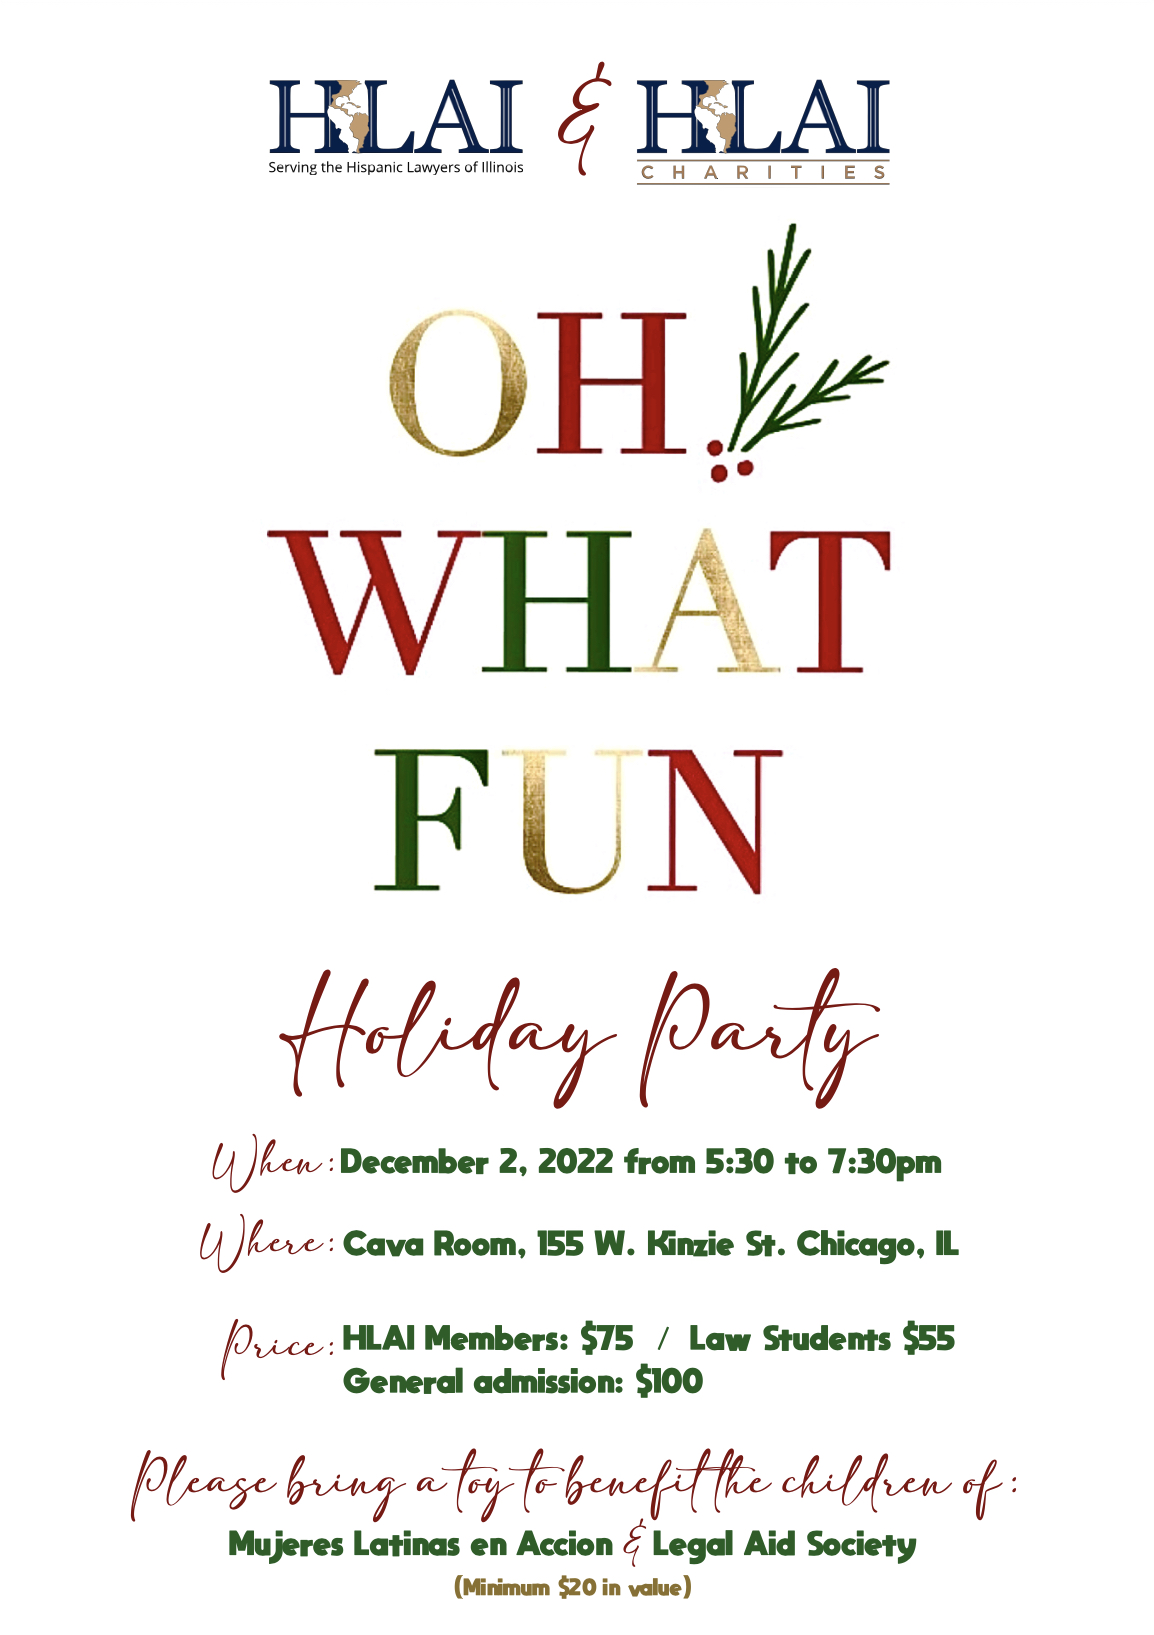 2022 HLAI & HLAI CHARITIES HOLIDAY PARTY